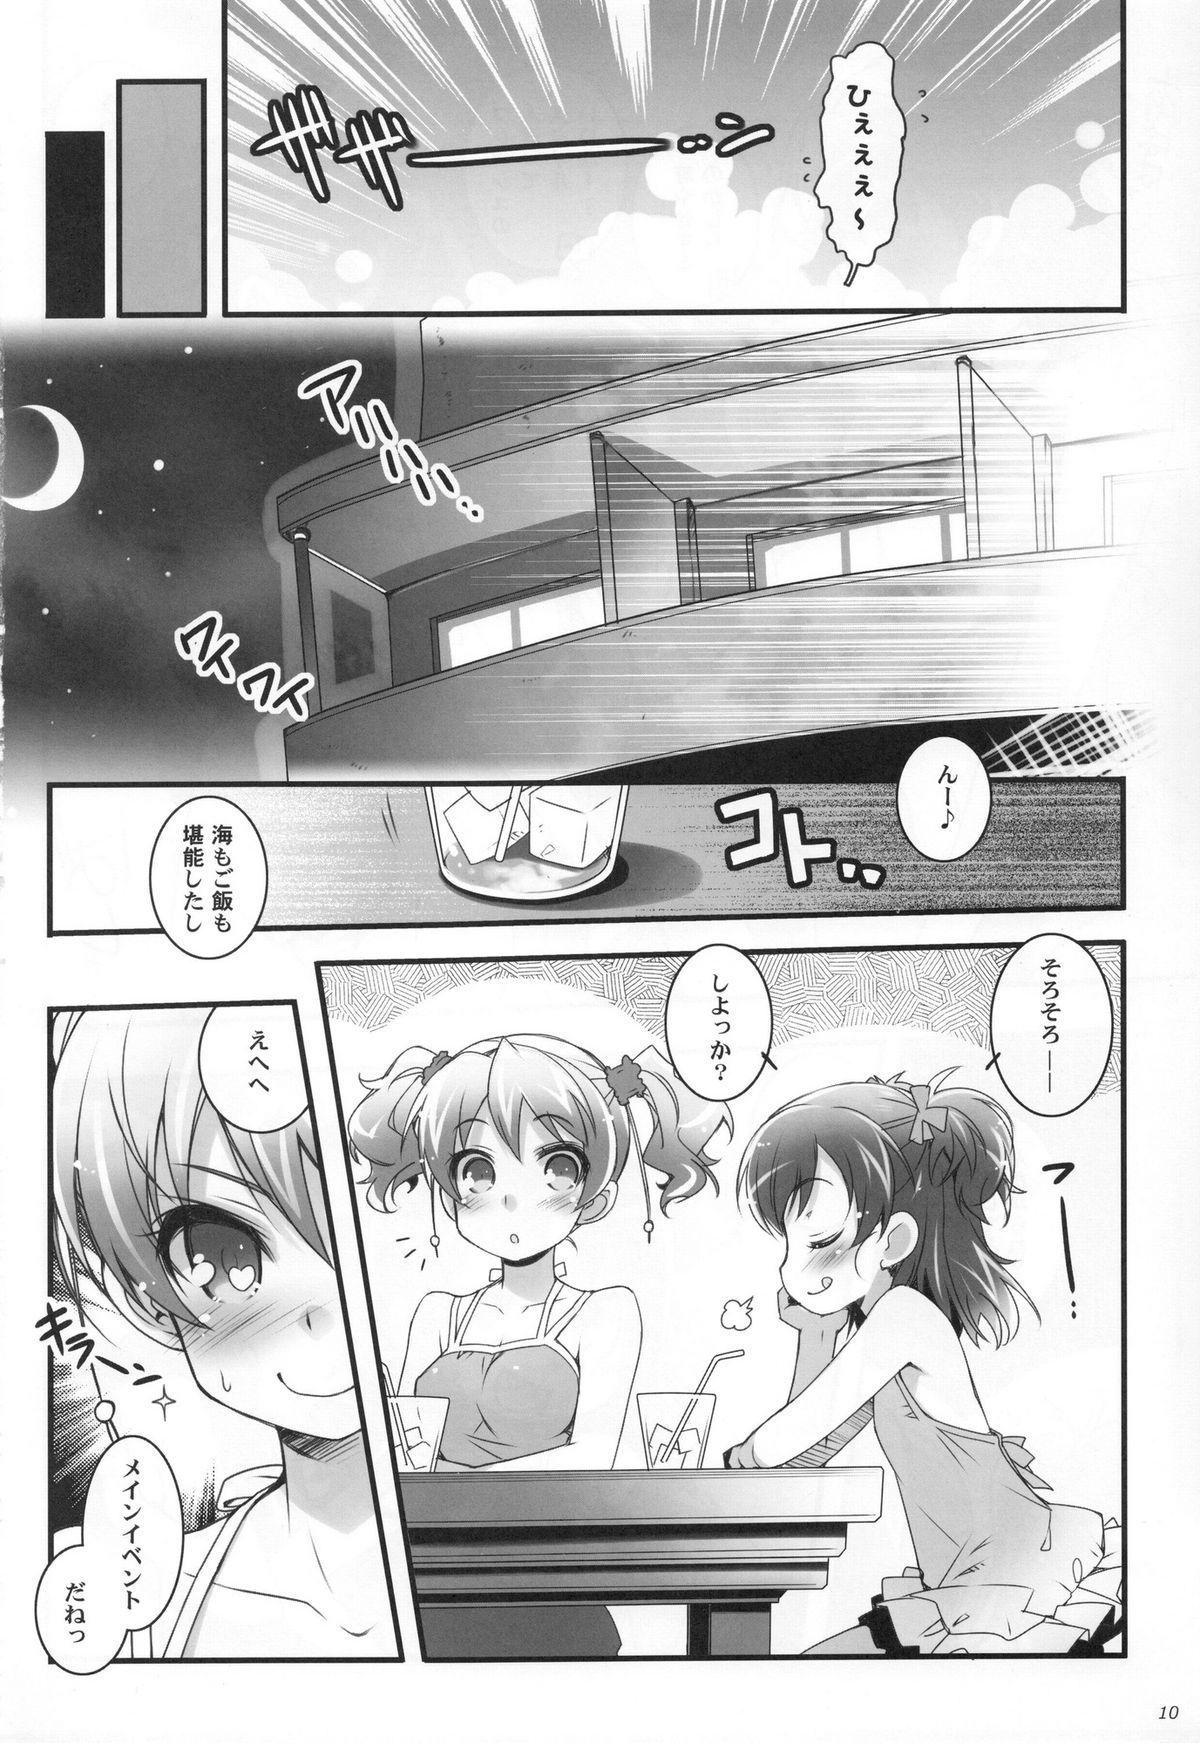 Casting Sweet Summer Vacation! - Pretty cure Suite precure Brazzers - Page 10